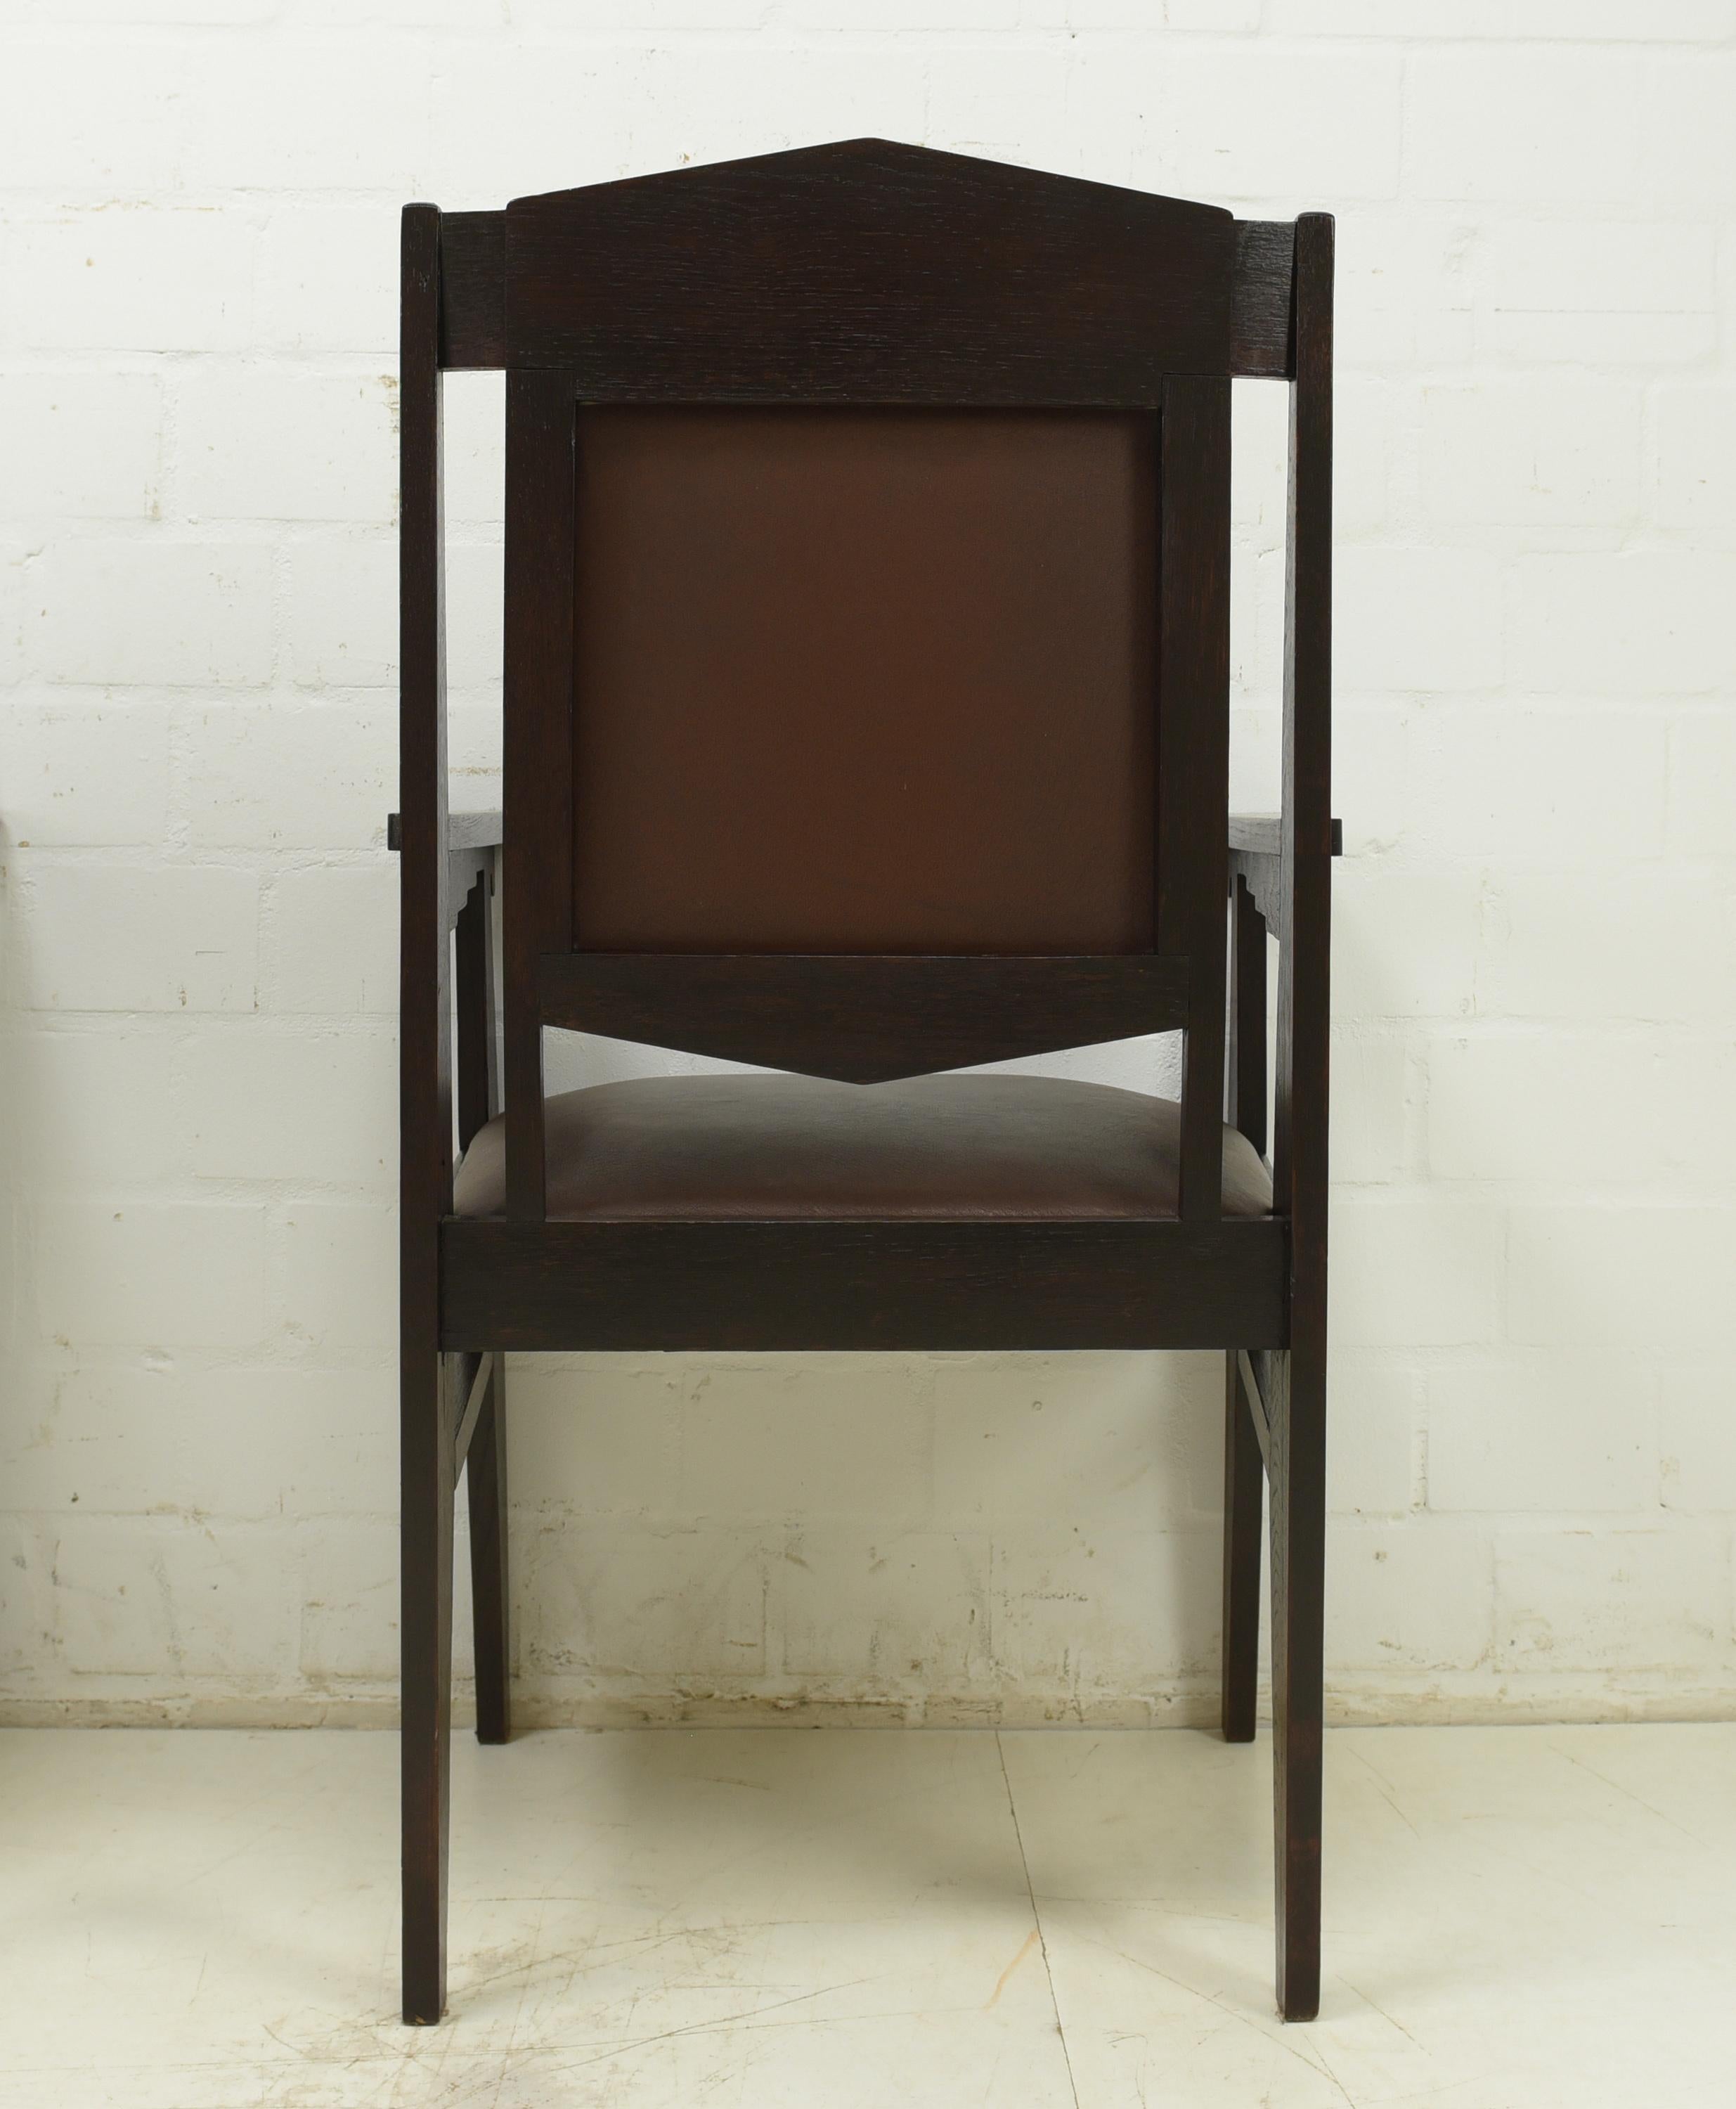 Pair of Art Deco Armchair Desk Chairs in Solid Oak, 1925 For Sale 4